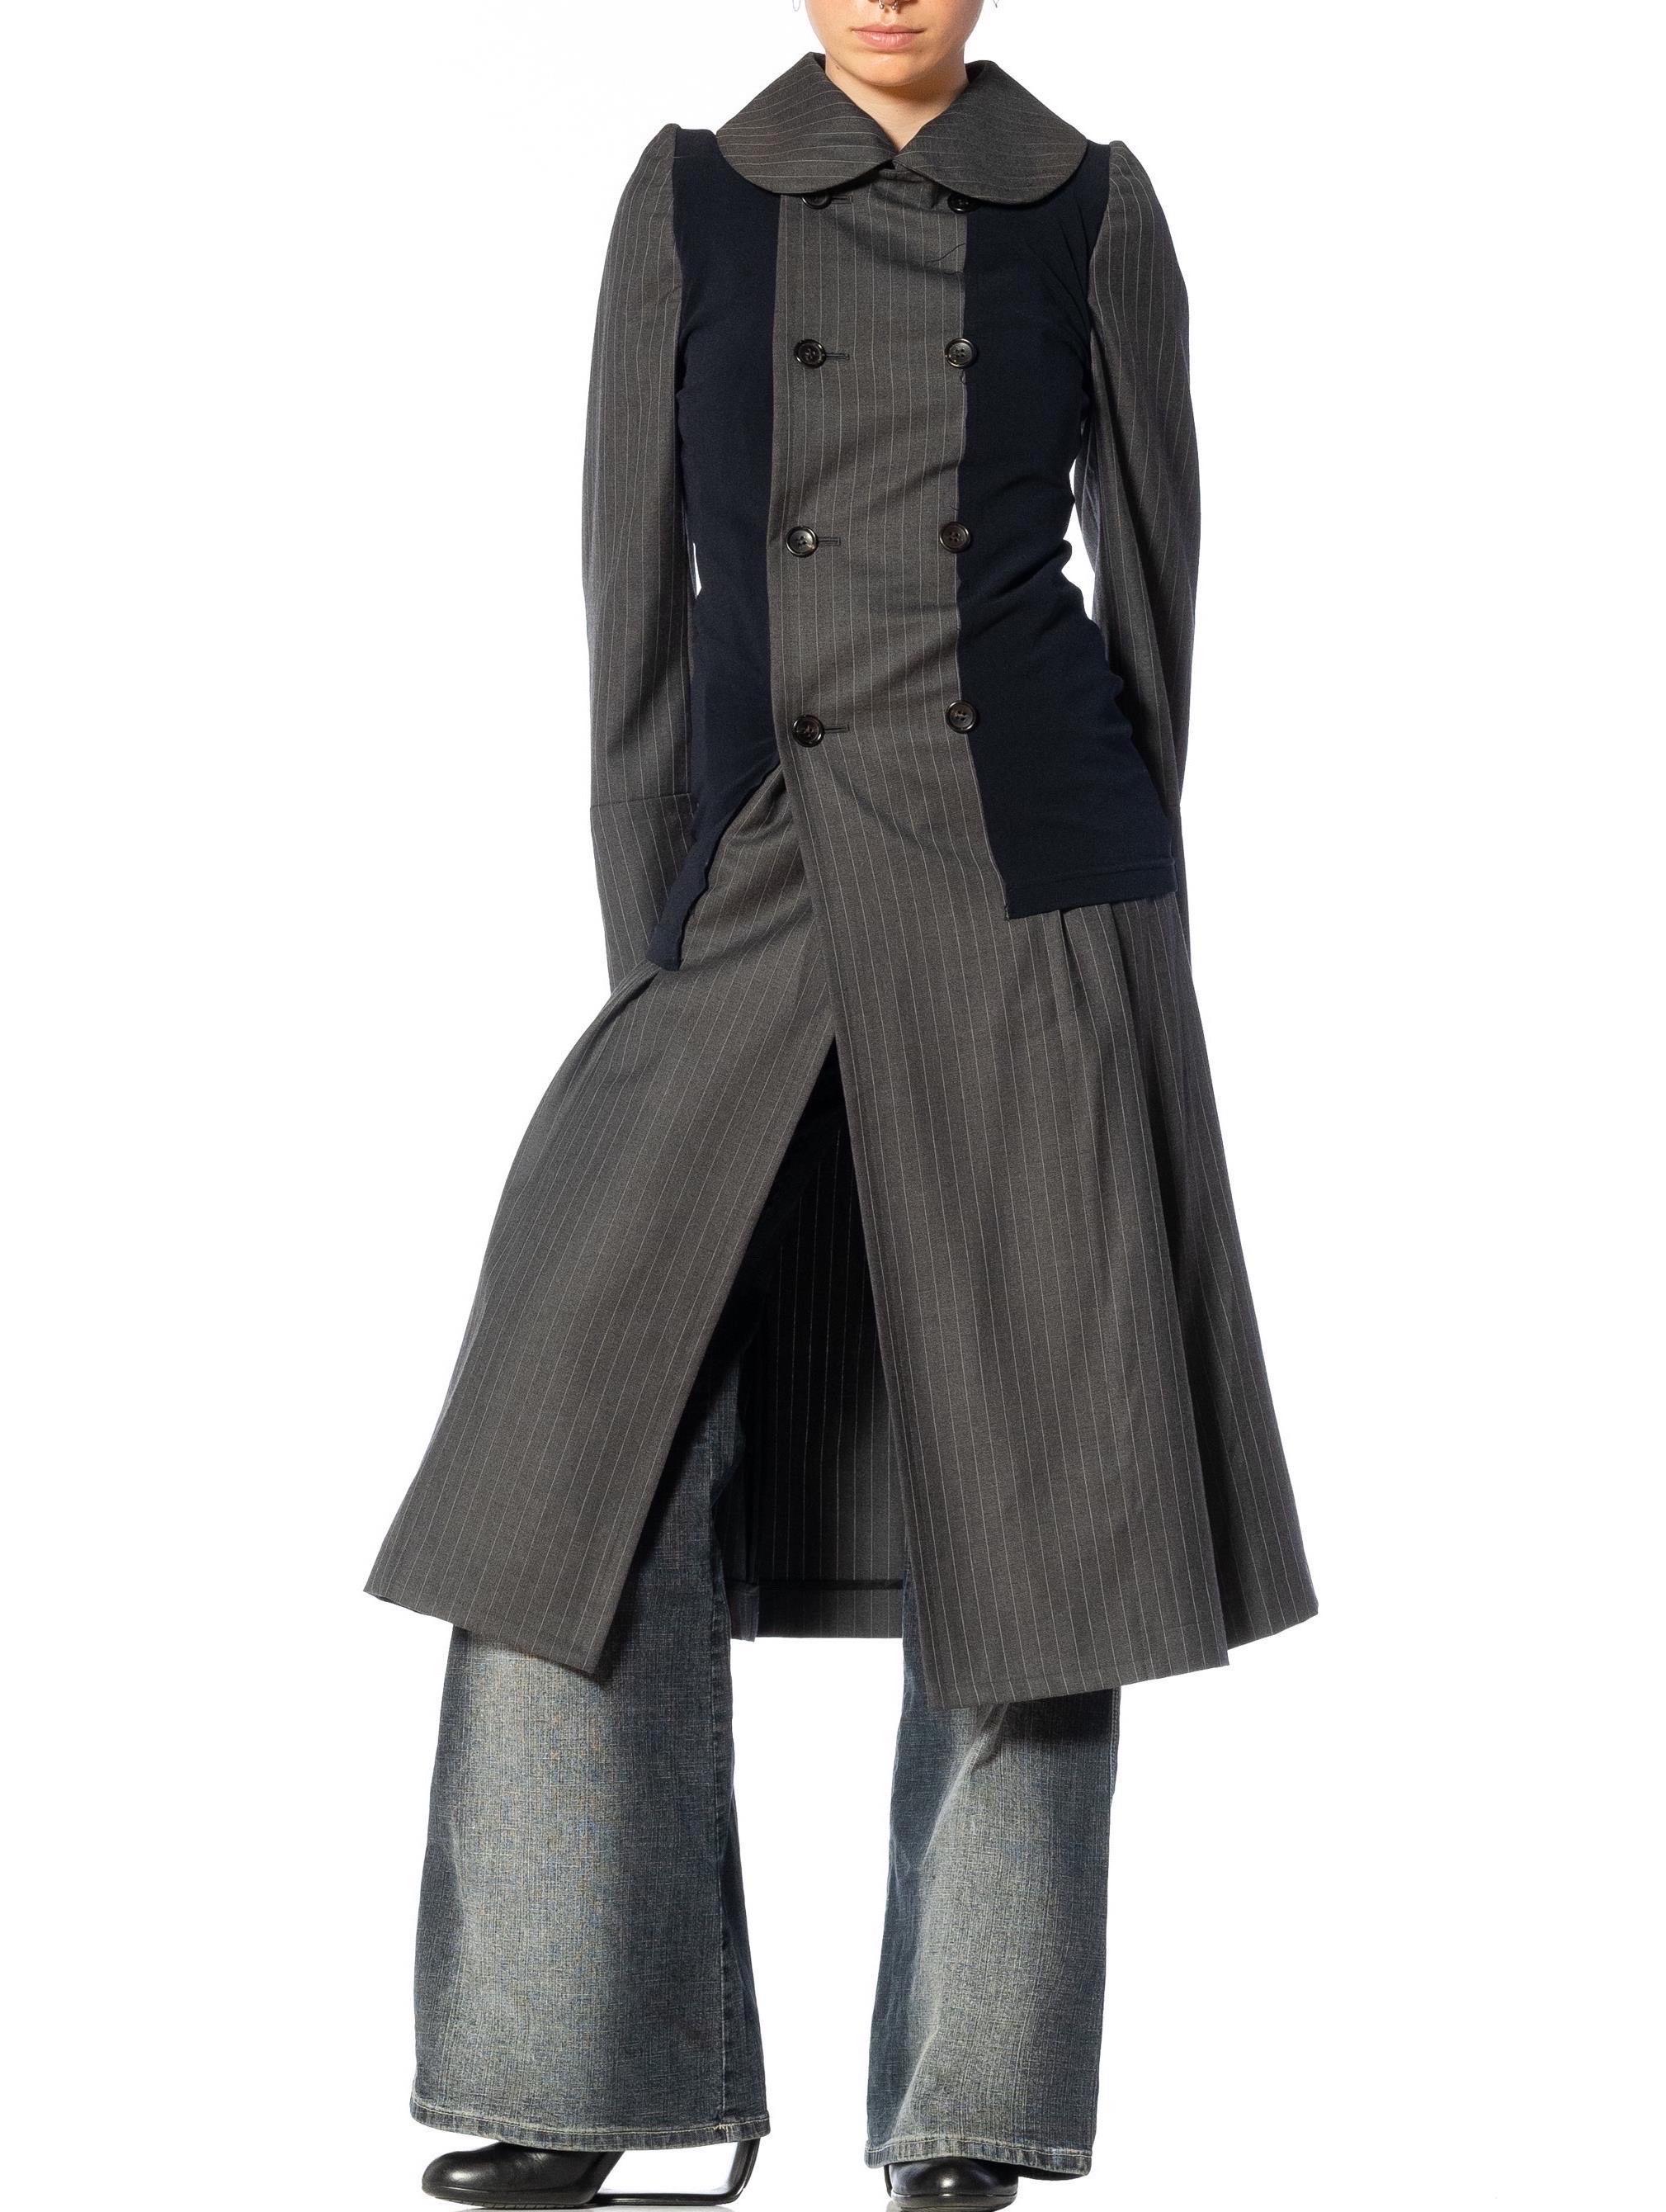 2000S COMME DES GARCONS Gray & Navy Wool Coat With Shrunken Poly Over-Layer 2007 For Sale 2